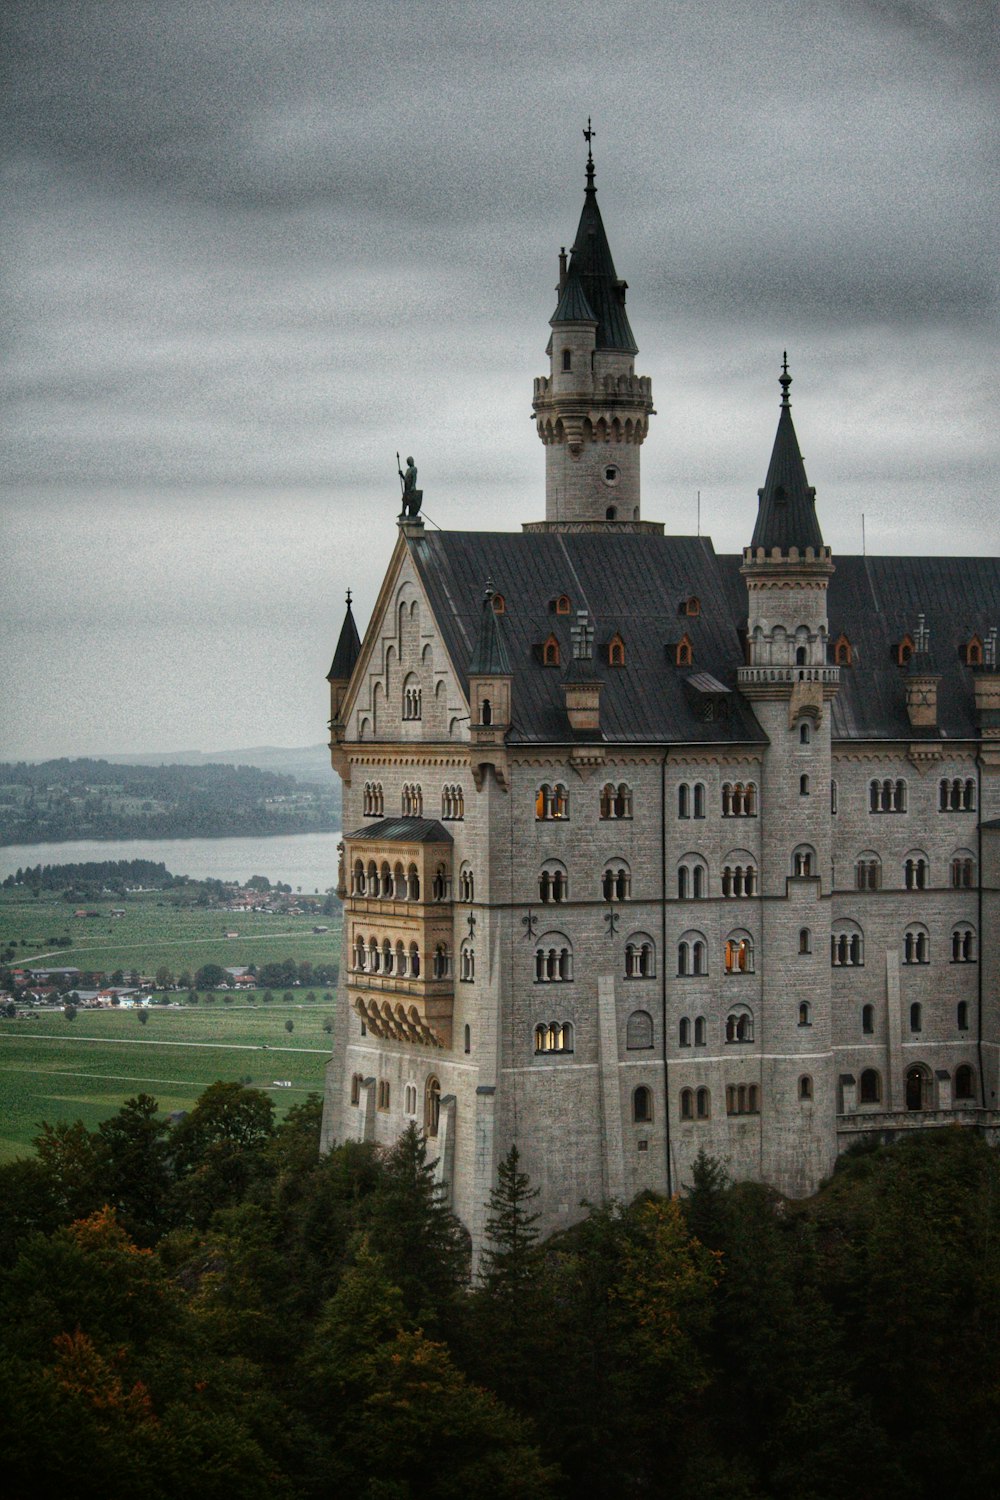 a large castle with a clock tower on top of it